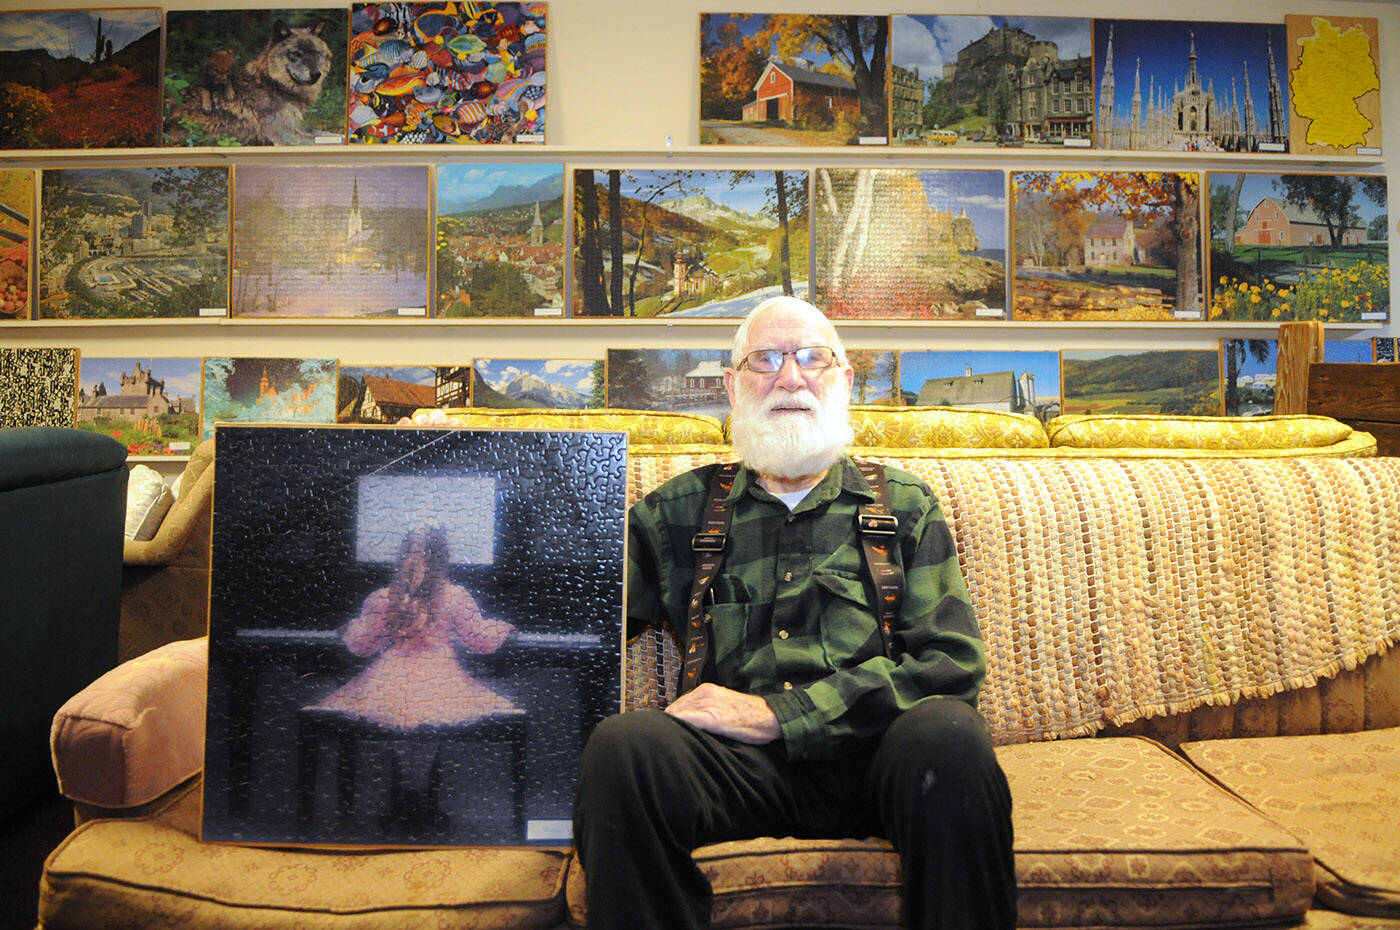 Joe Sommer has completed 190 jigsaw puzzles, all of which are on display in the basement of his Chilliwack home. He is seen here with the very first puzzle he recieved as a gift. (Jenna Hauck/ Chilliwack Progress)